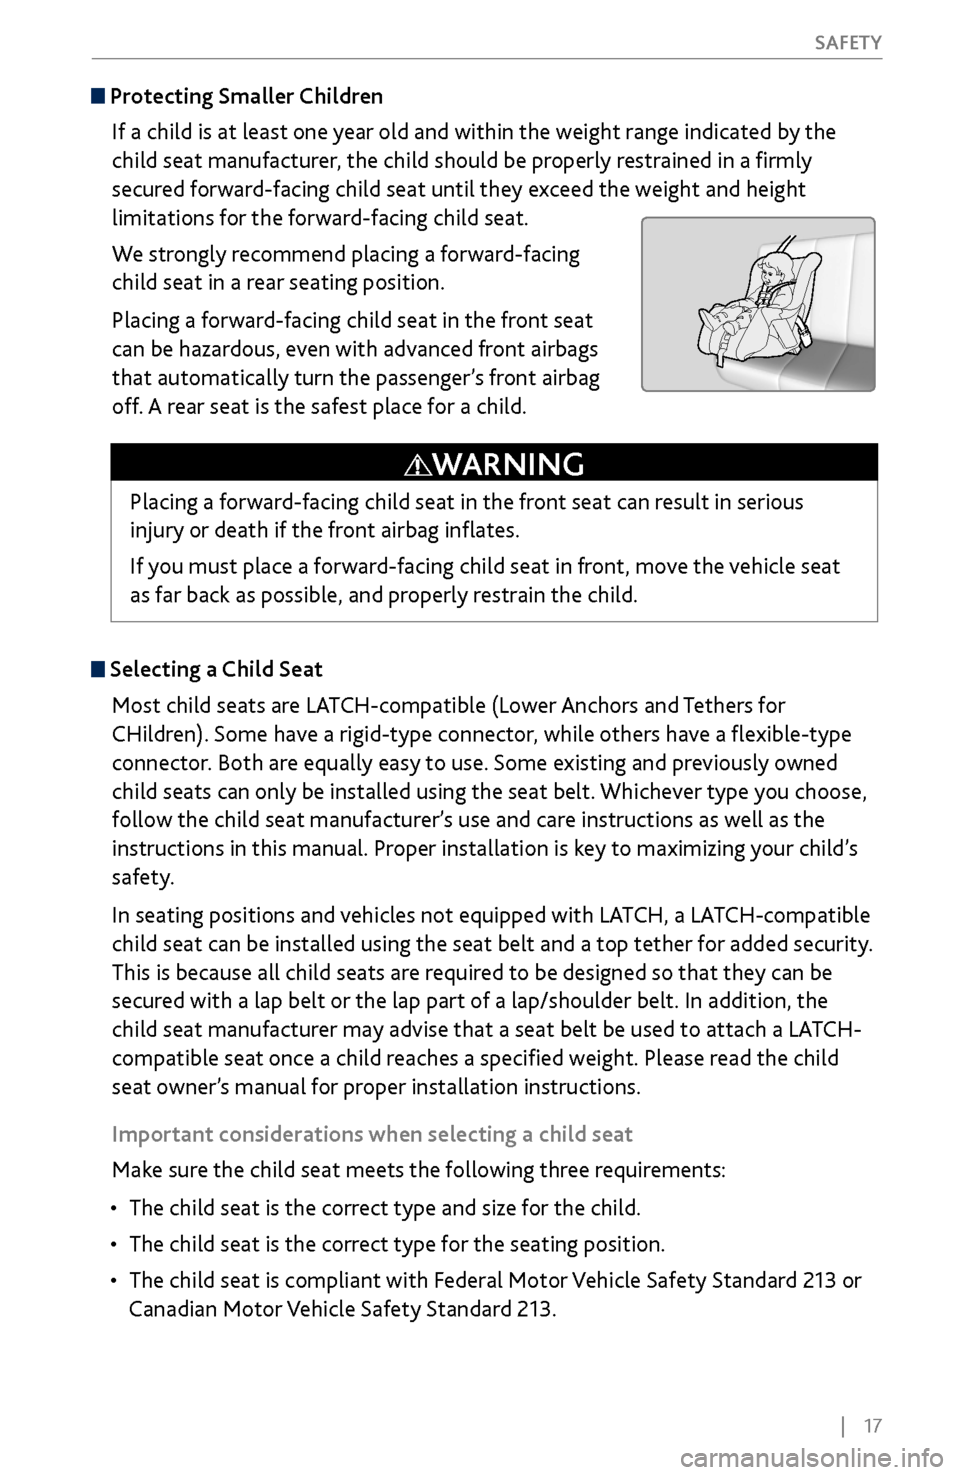 Acura MDX 2017 Owners Manual |    17
       S
AFETY
 Protecting Smaller Children
If a child is at least one year old and within the weight range indicated by the 
child seat manufacturer, the child should be properly restrained i